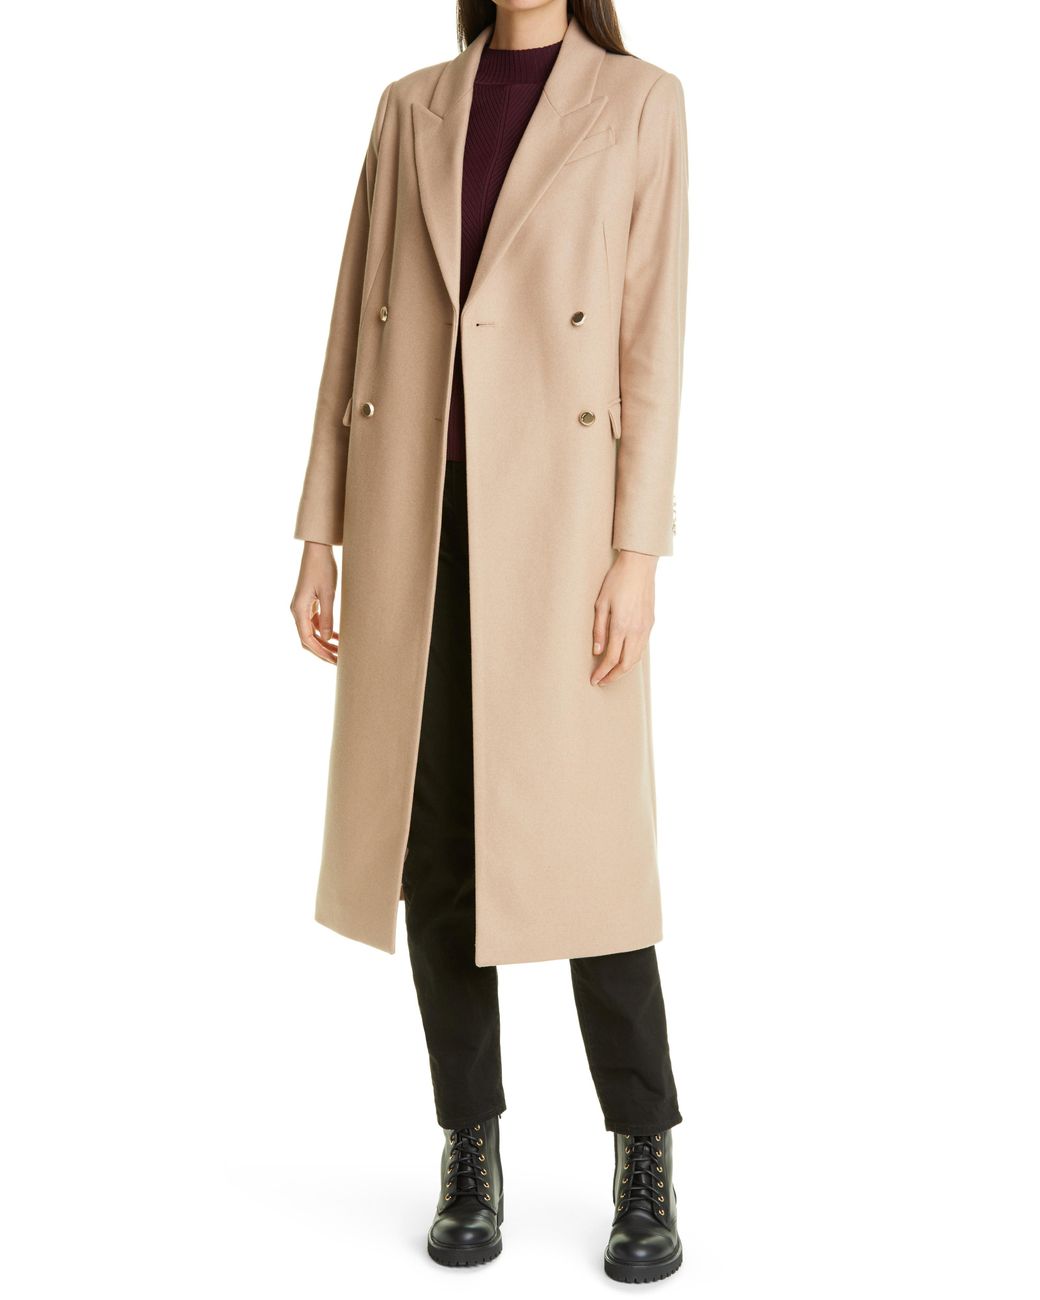 Ted Baker Yecara Double Breasted Wool Blend Coat in Camel (Natural) - Lyst